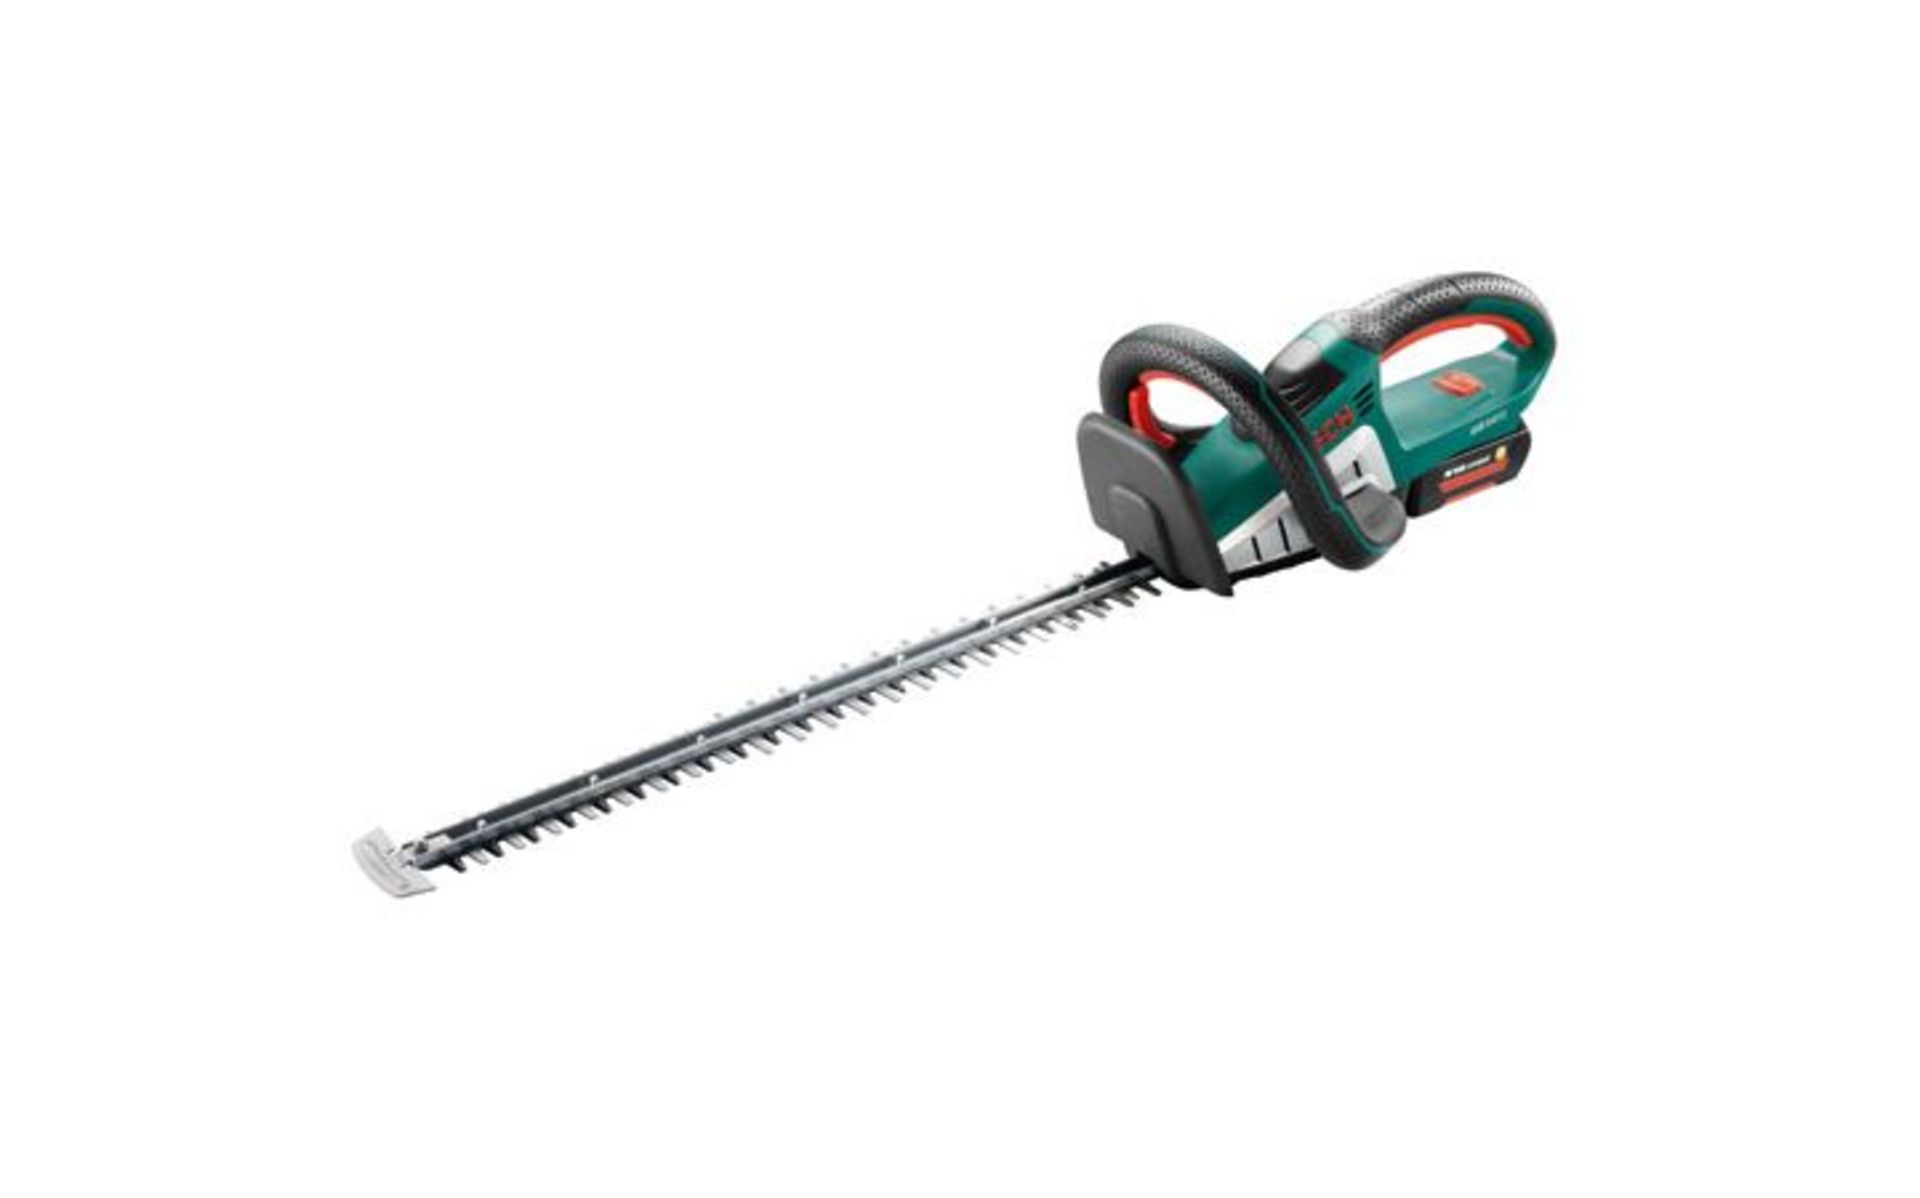 2 x BOXED GARDEN LINE 18V LITHIUM HEDGE TRIMMERS (16.11.17) *PLEASE NOTE THAT THE BID PRICE IS